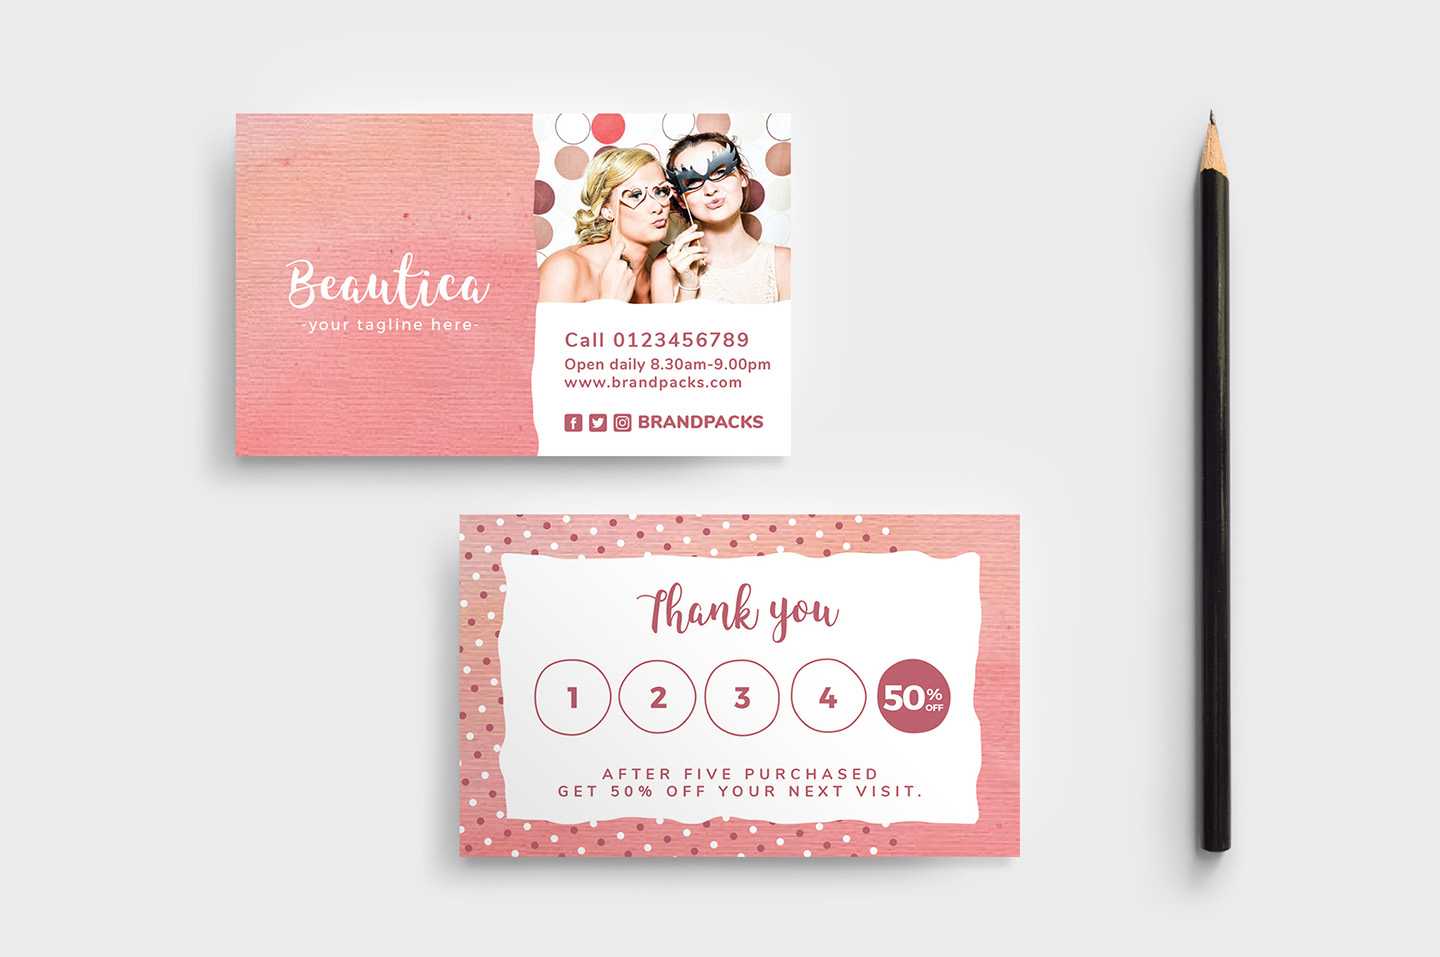 Free Loyalty Card Templates - Psd, Ai & Vector - Brandpacks With Membership Card Template Free